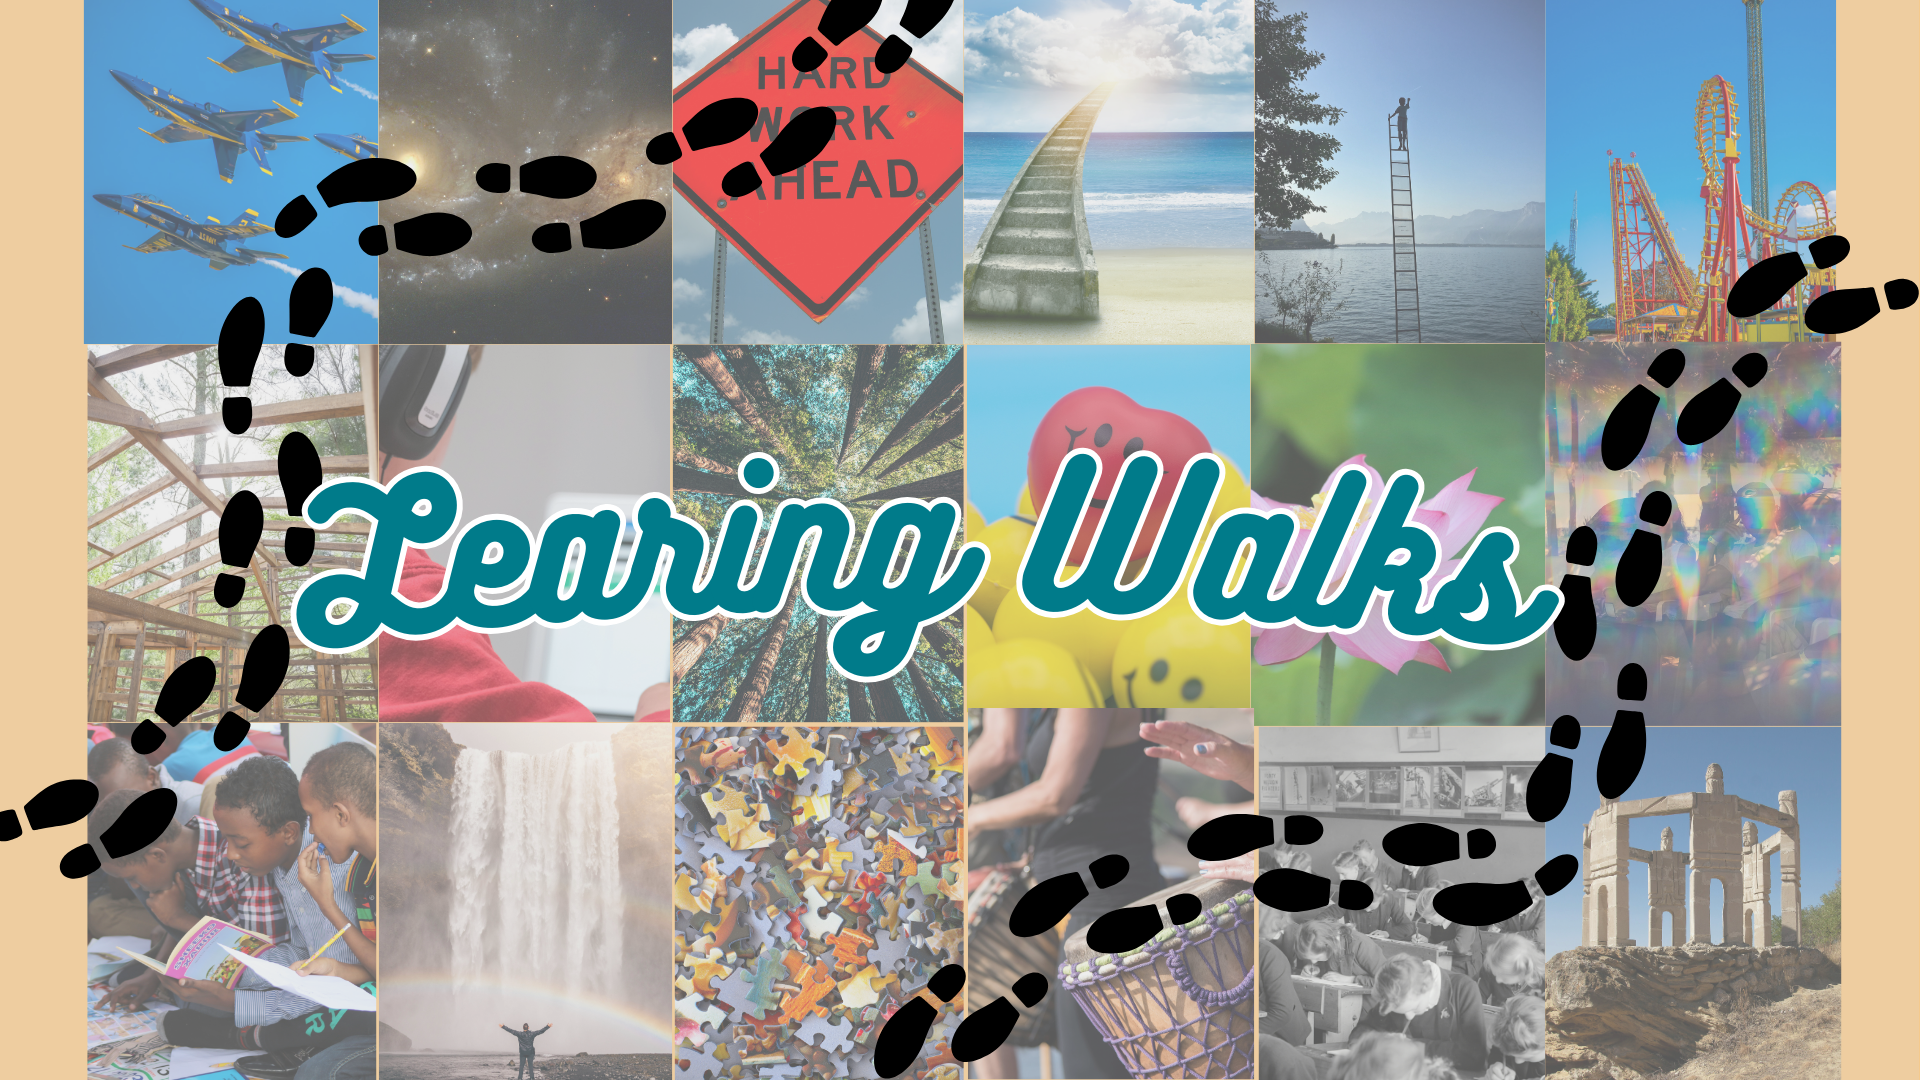 LEARNING WALKS – A TOOL FROM THE CENTER